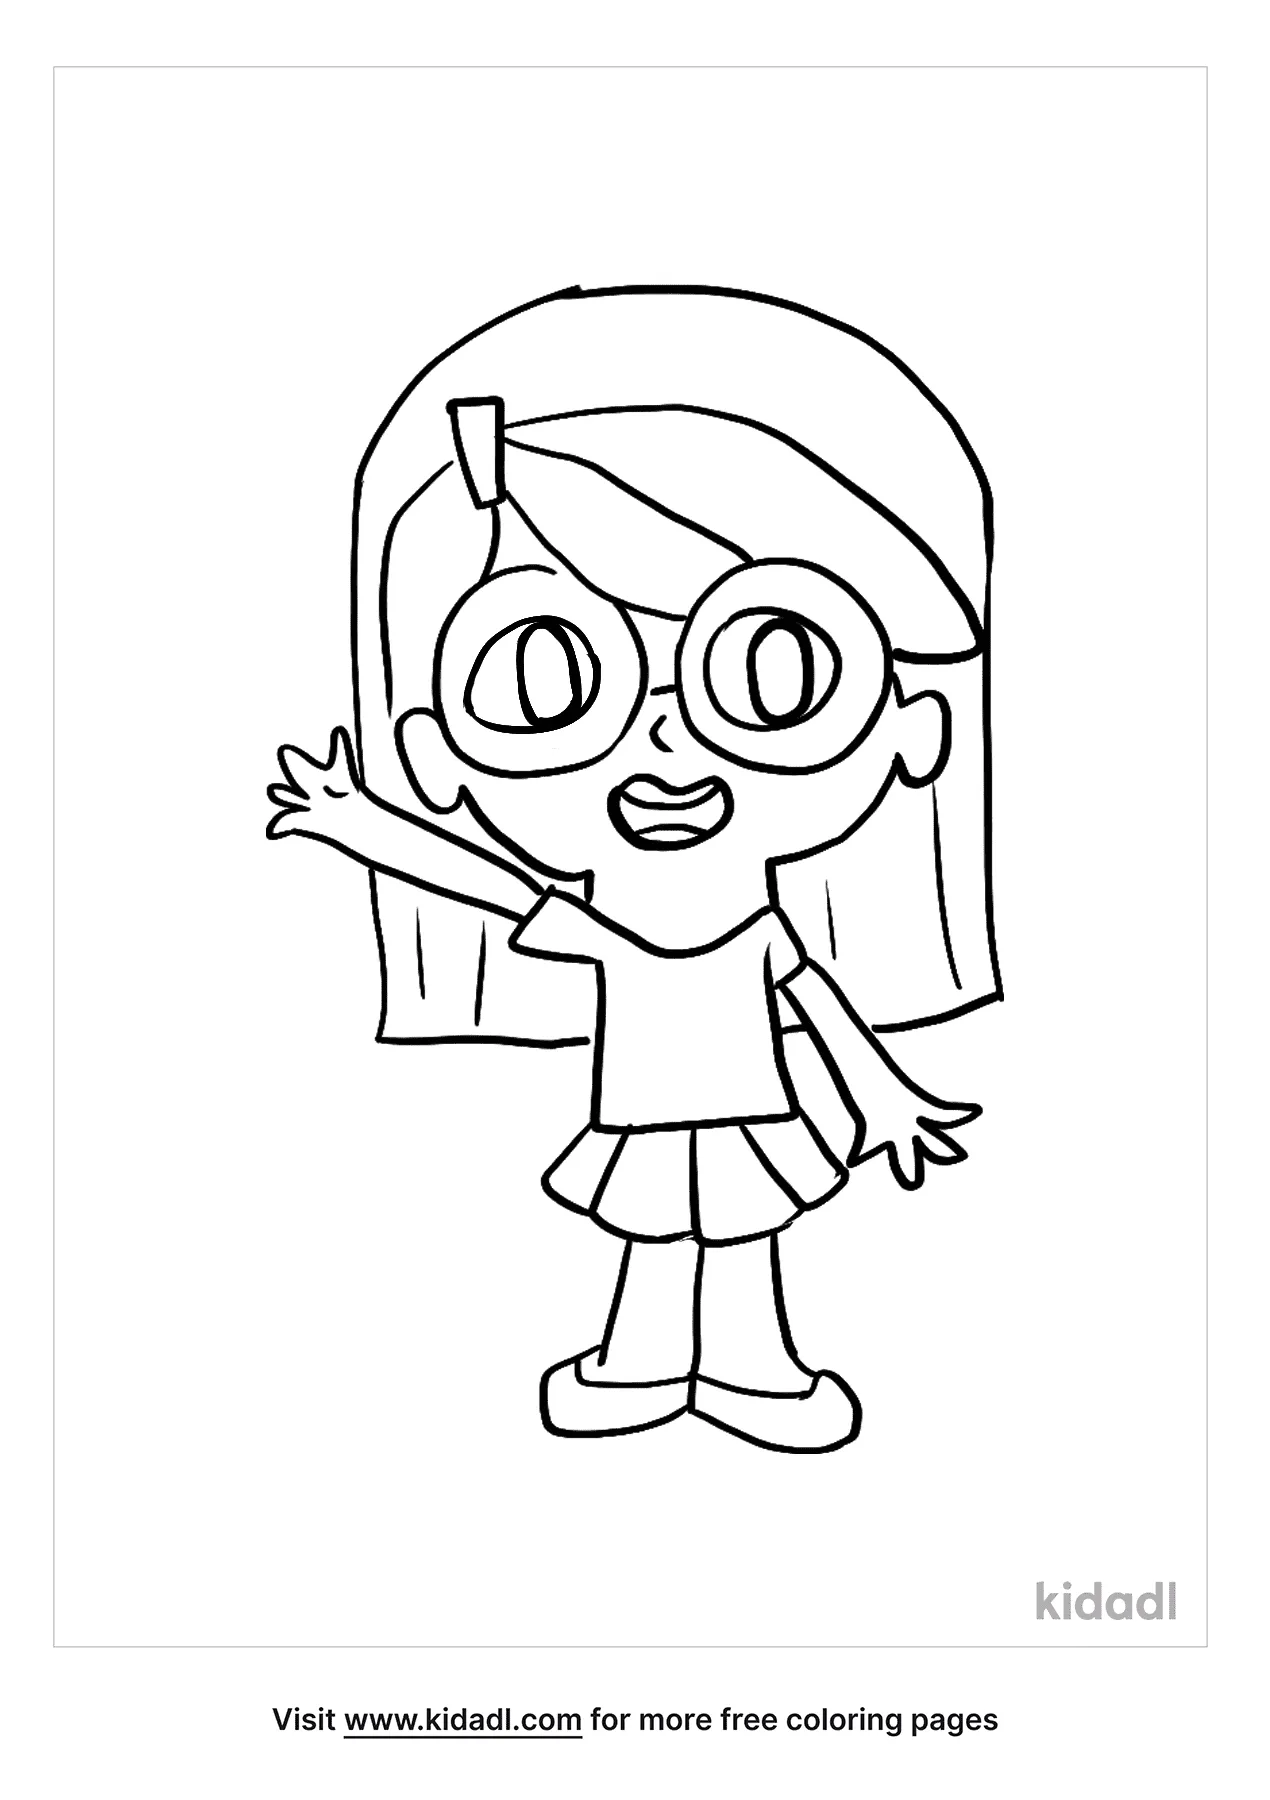 42+ nice image Hello Kids Coloring Pages / Hello Kids Coloring Pages